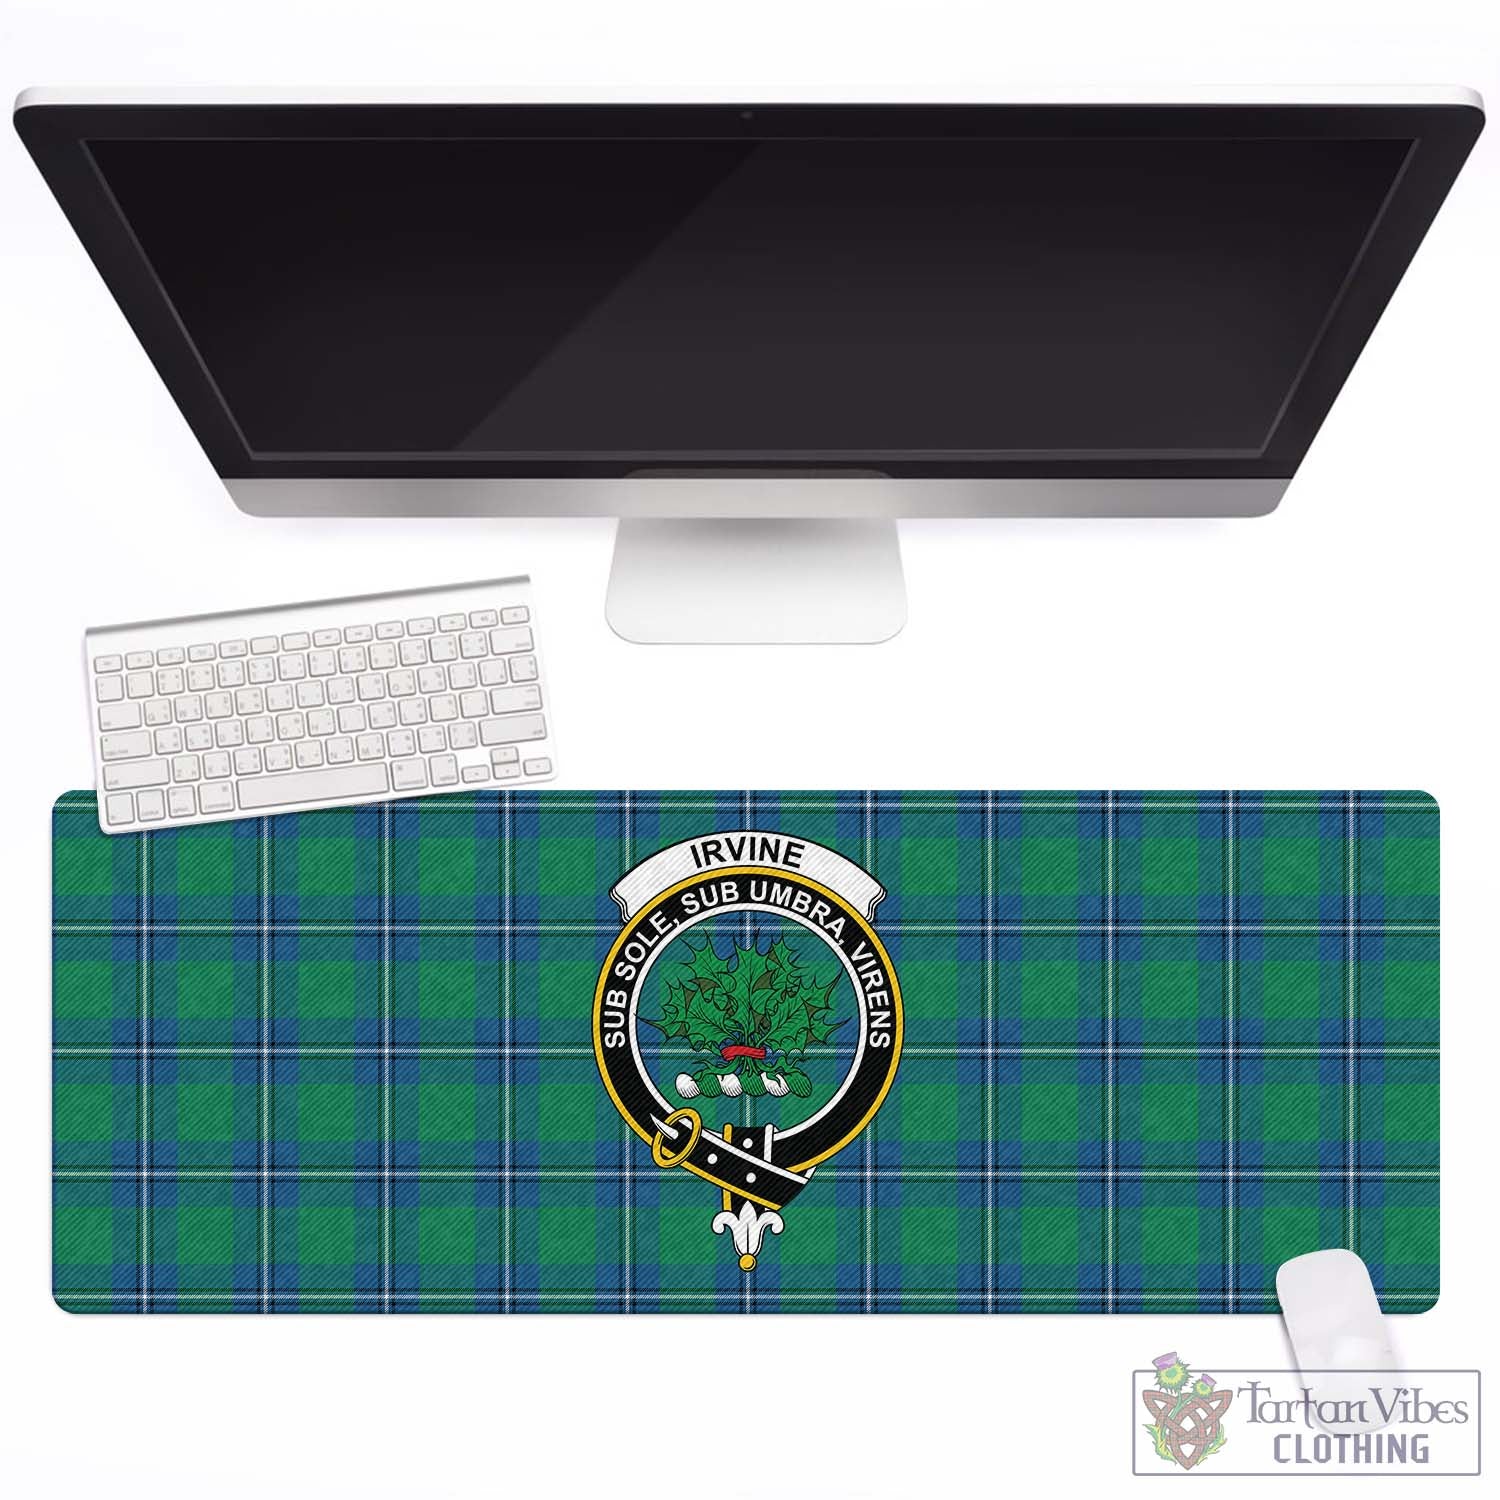 Tartan Vibes Clothing Irvine Ancient Tartan Mouse Pad with Family Crest